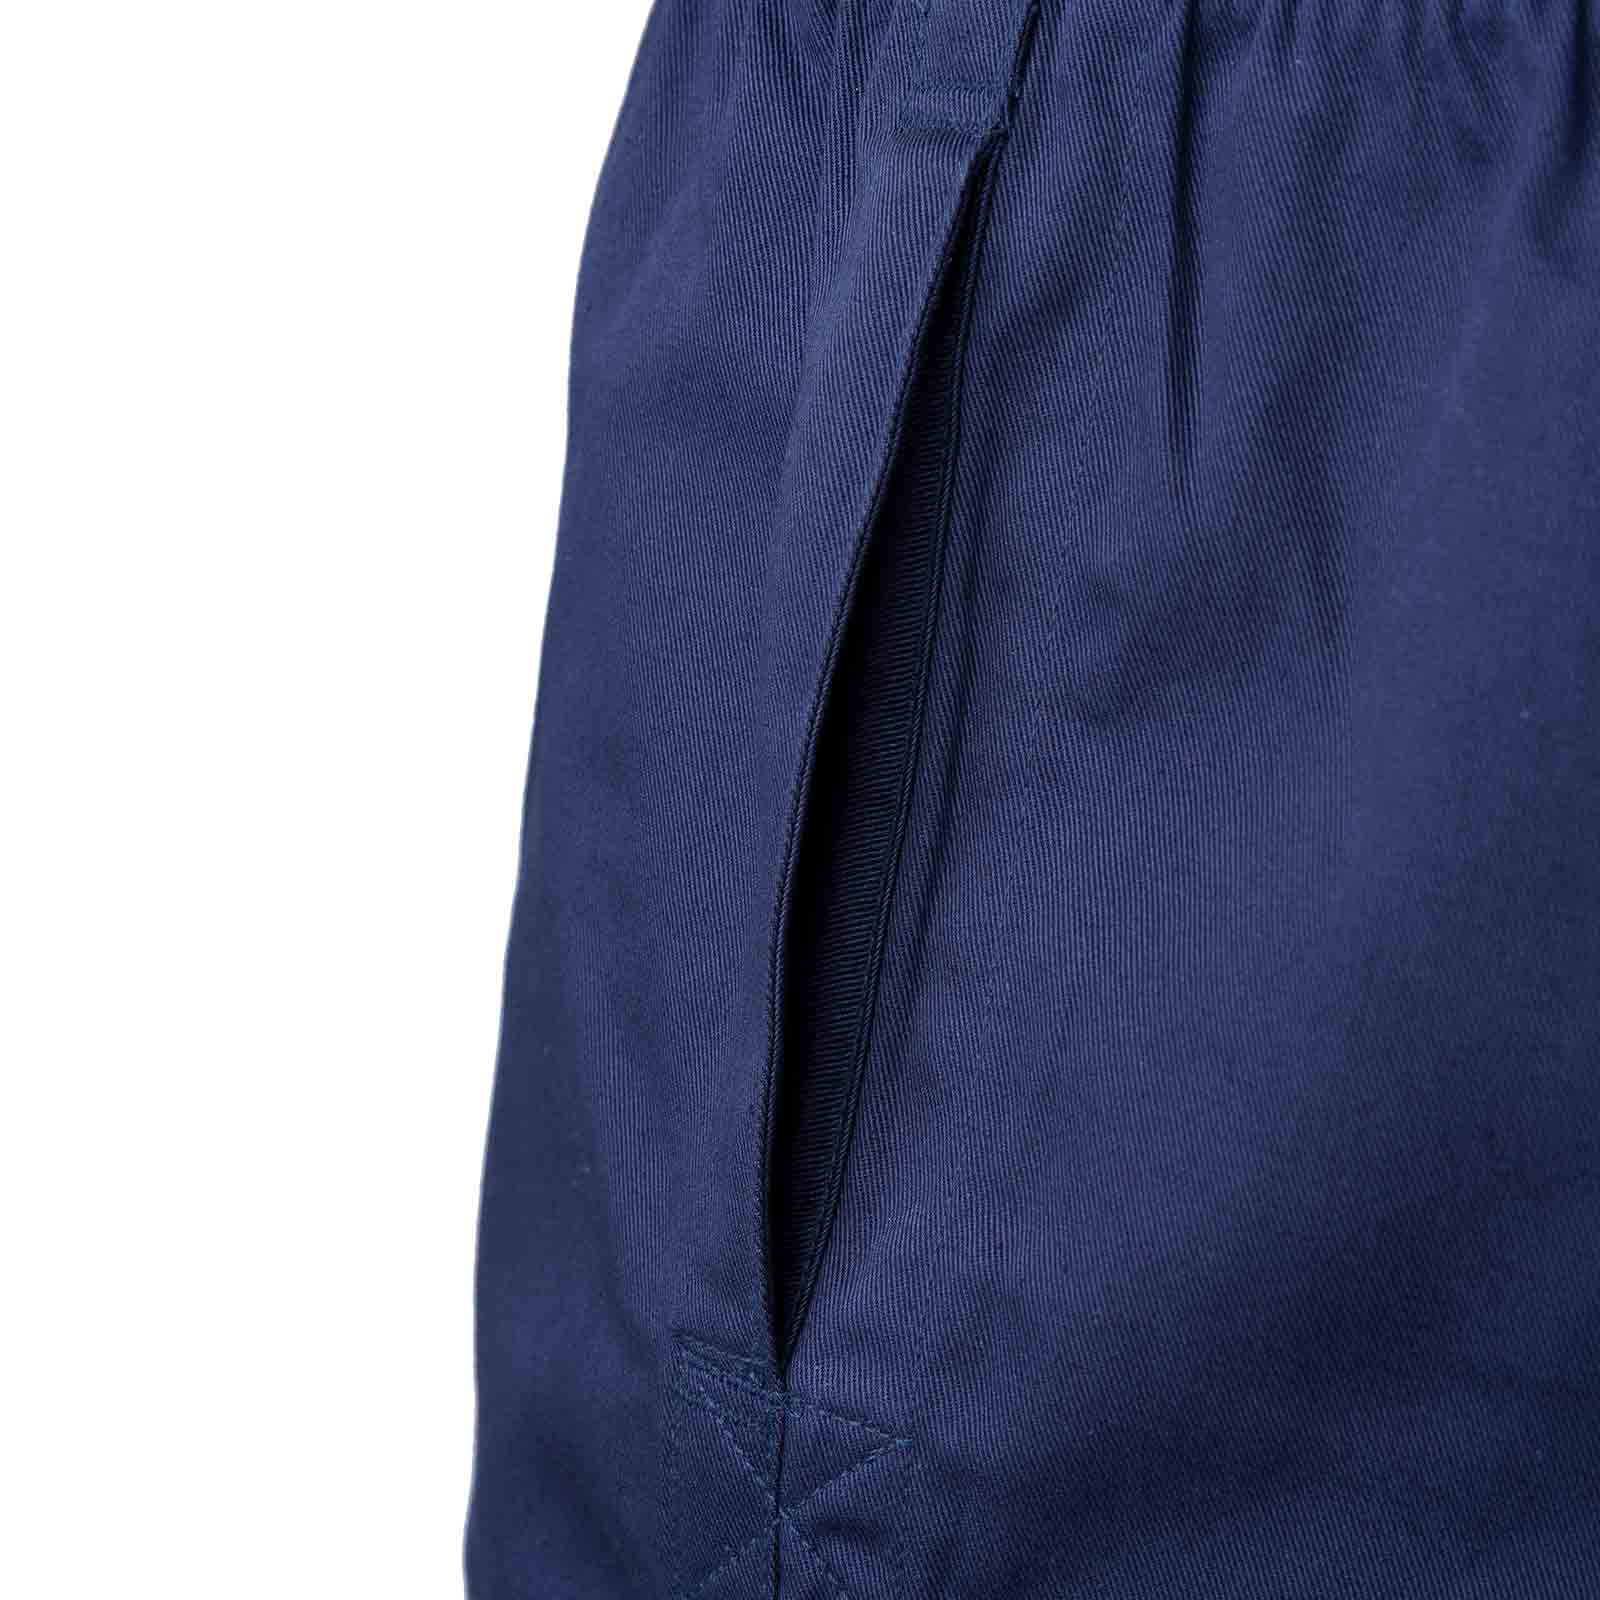 RUGBYTECH MENS RUGBY SHORT NAVY